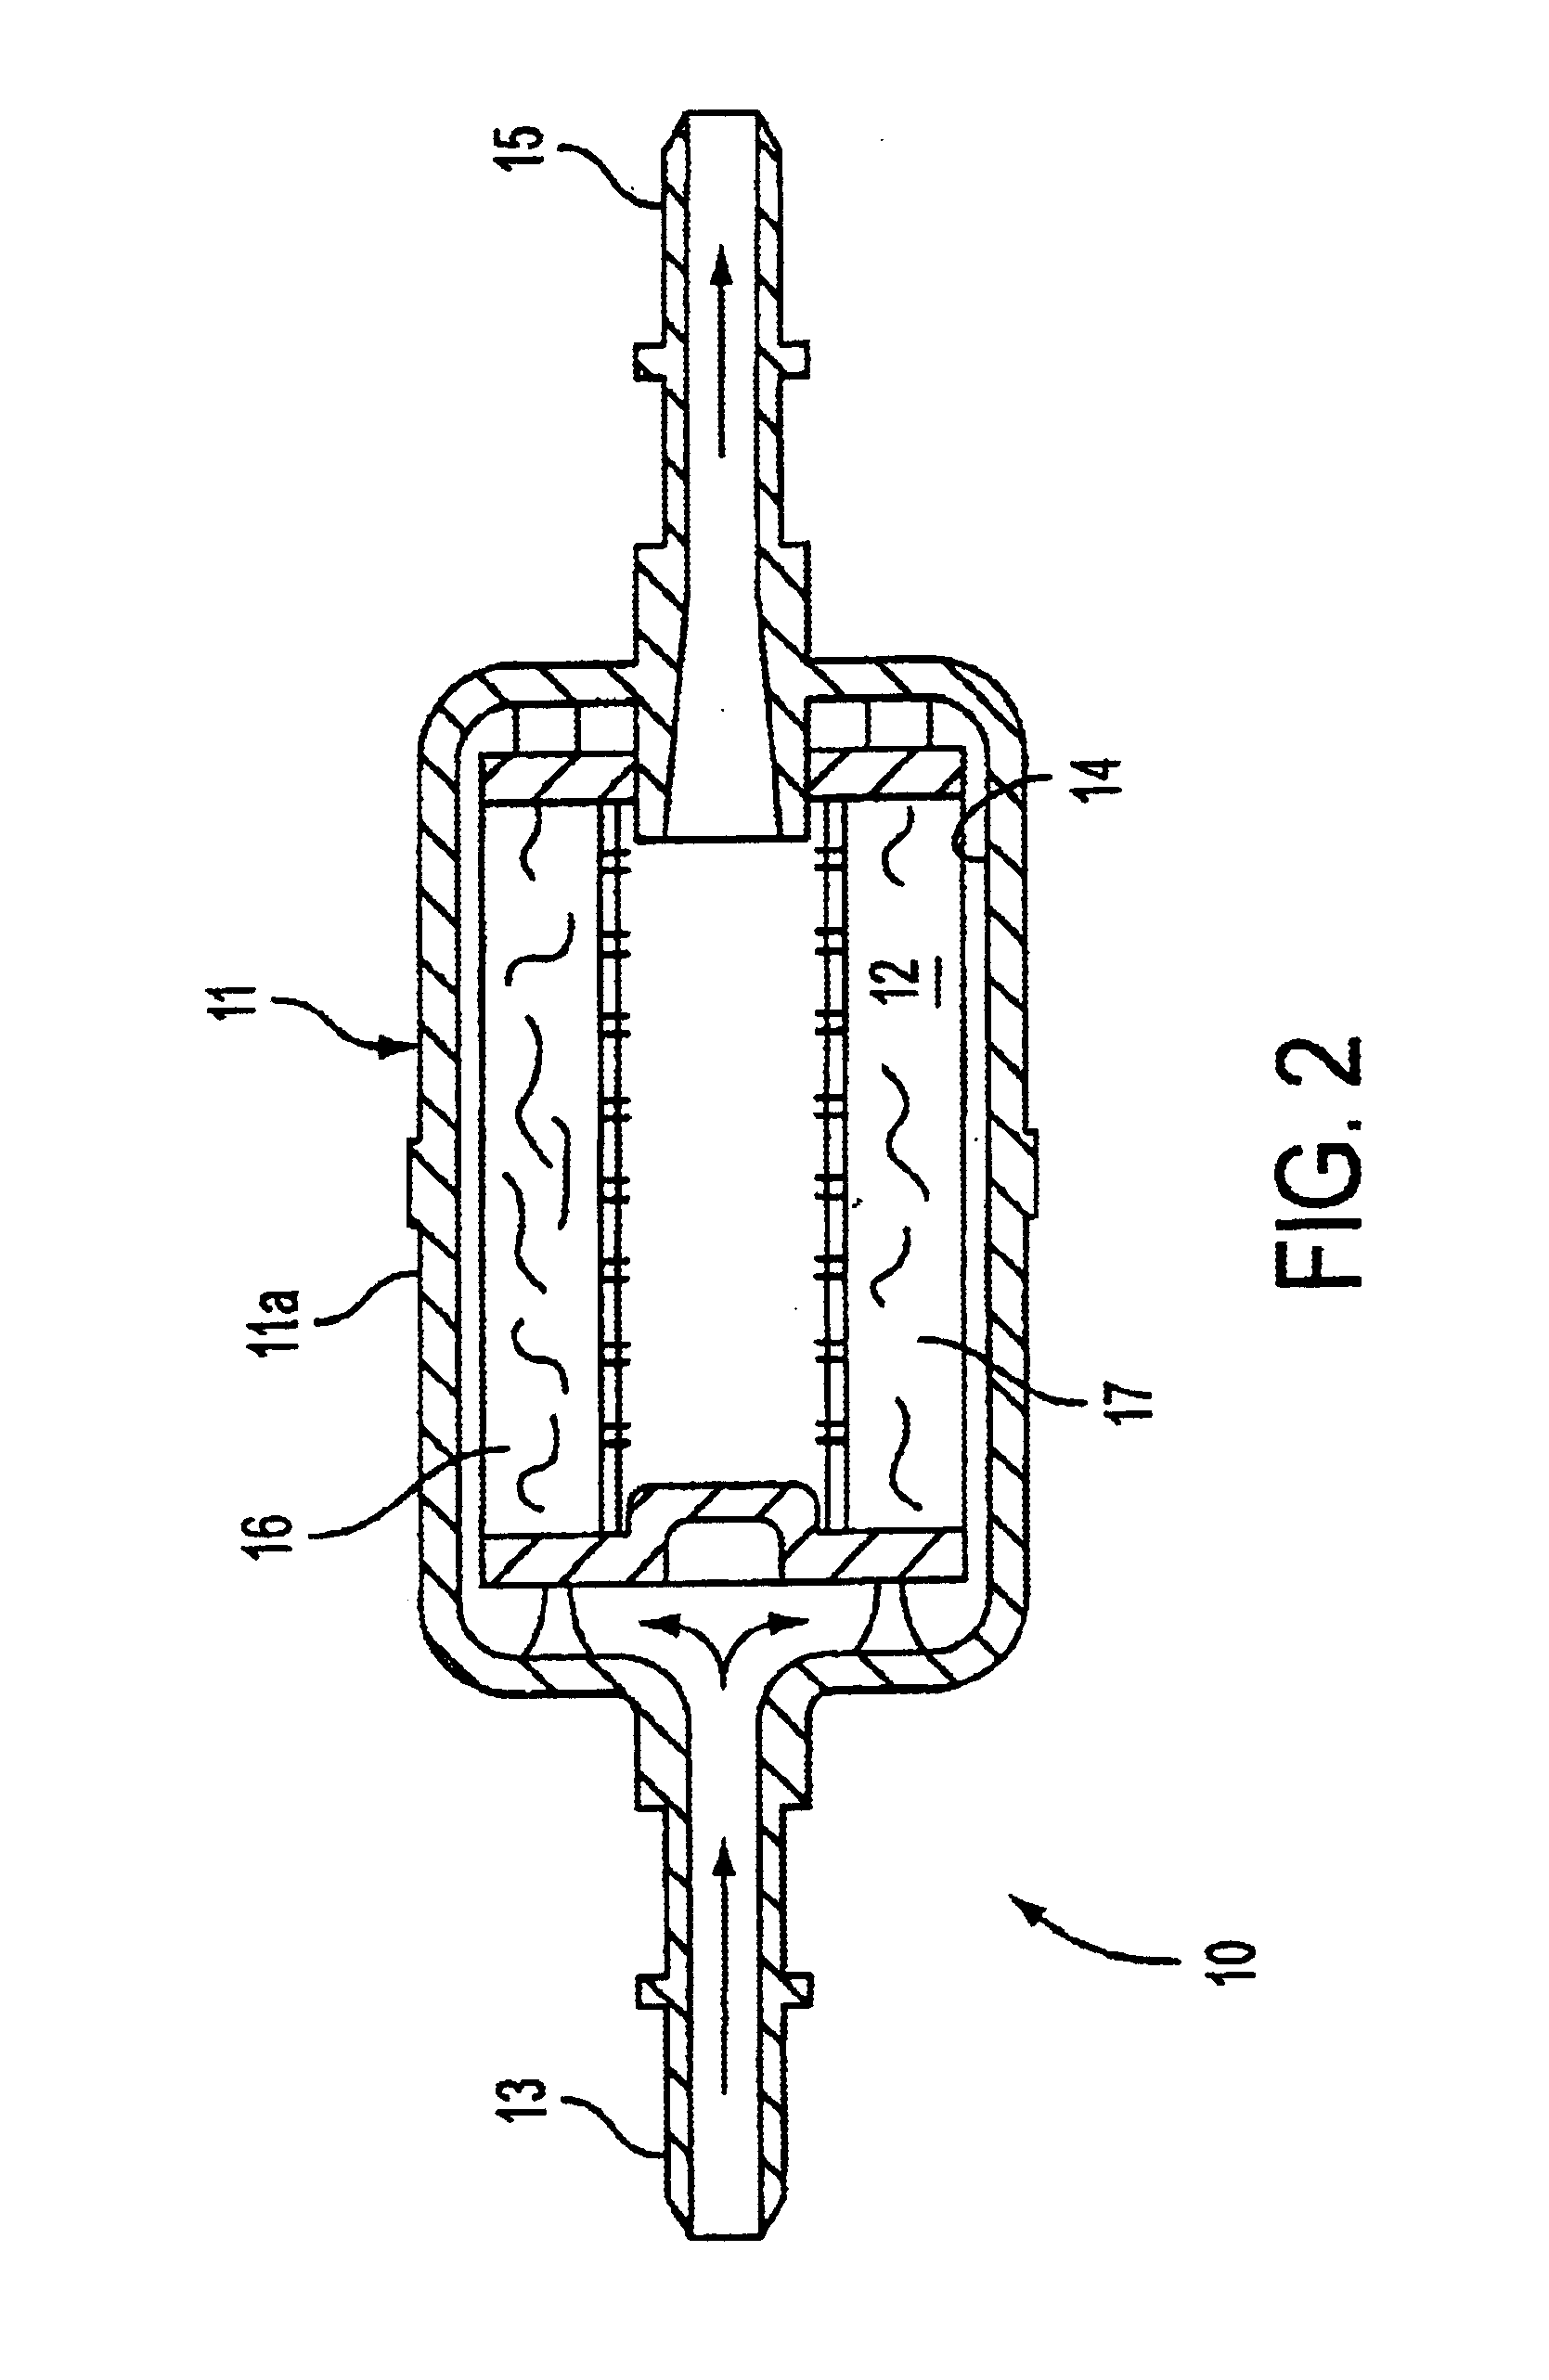 Filter apparatus for removing sulfur-containing compounds from liquid fuels, and methods of using same